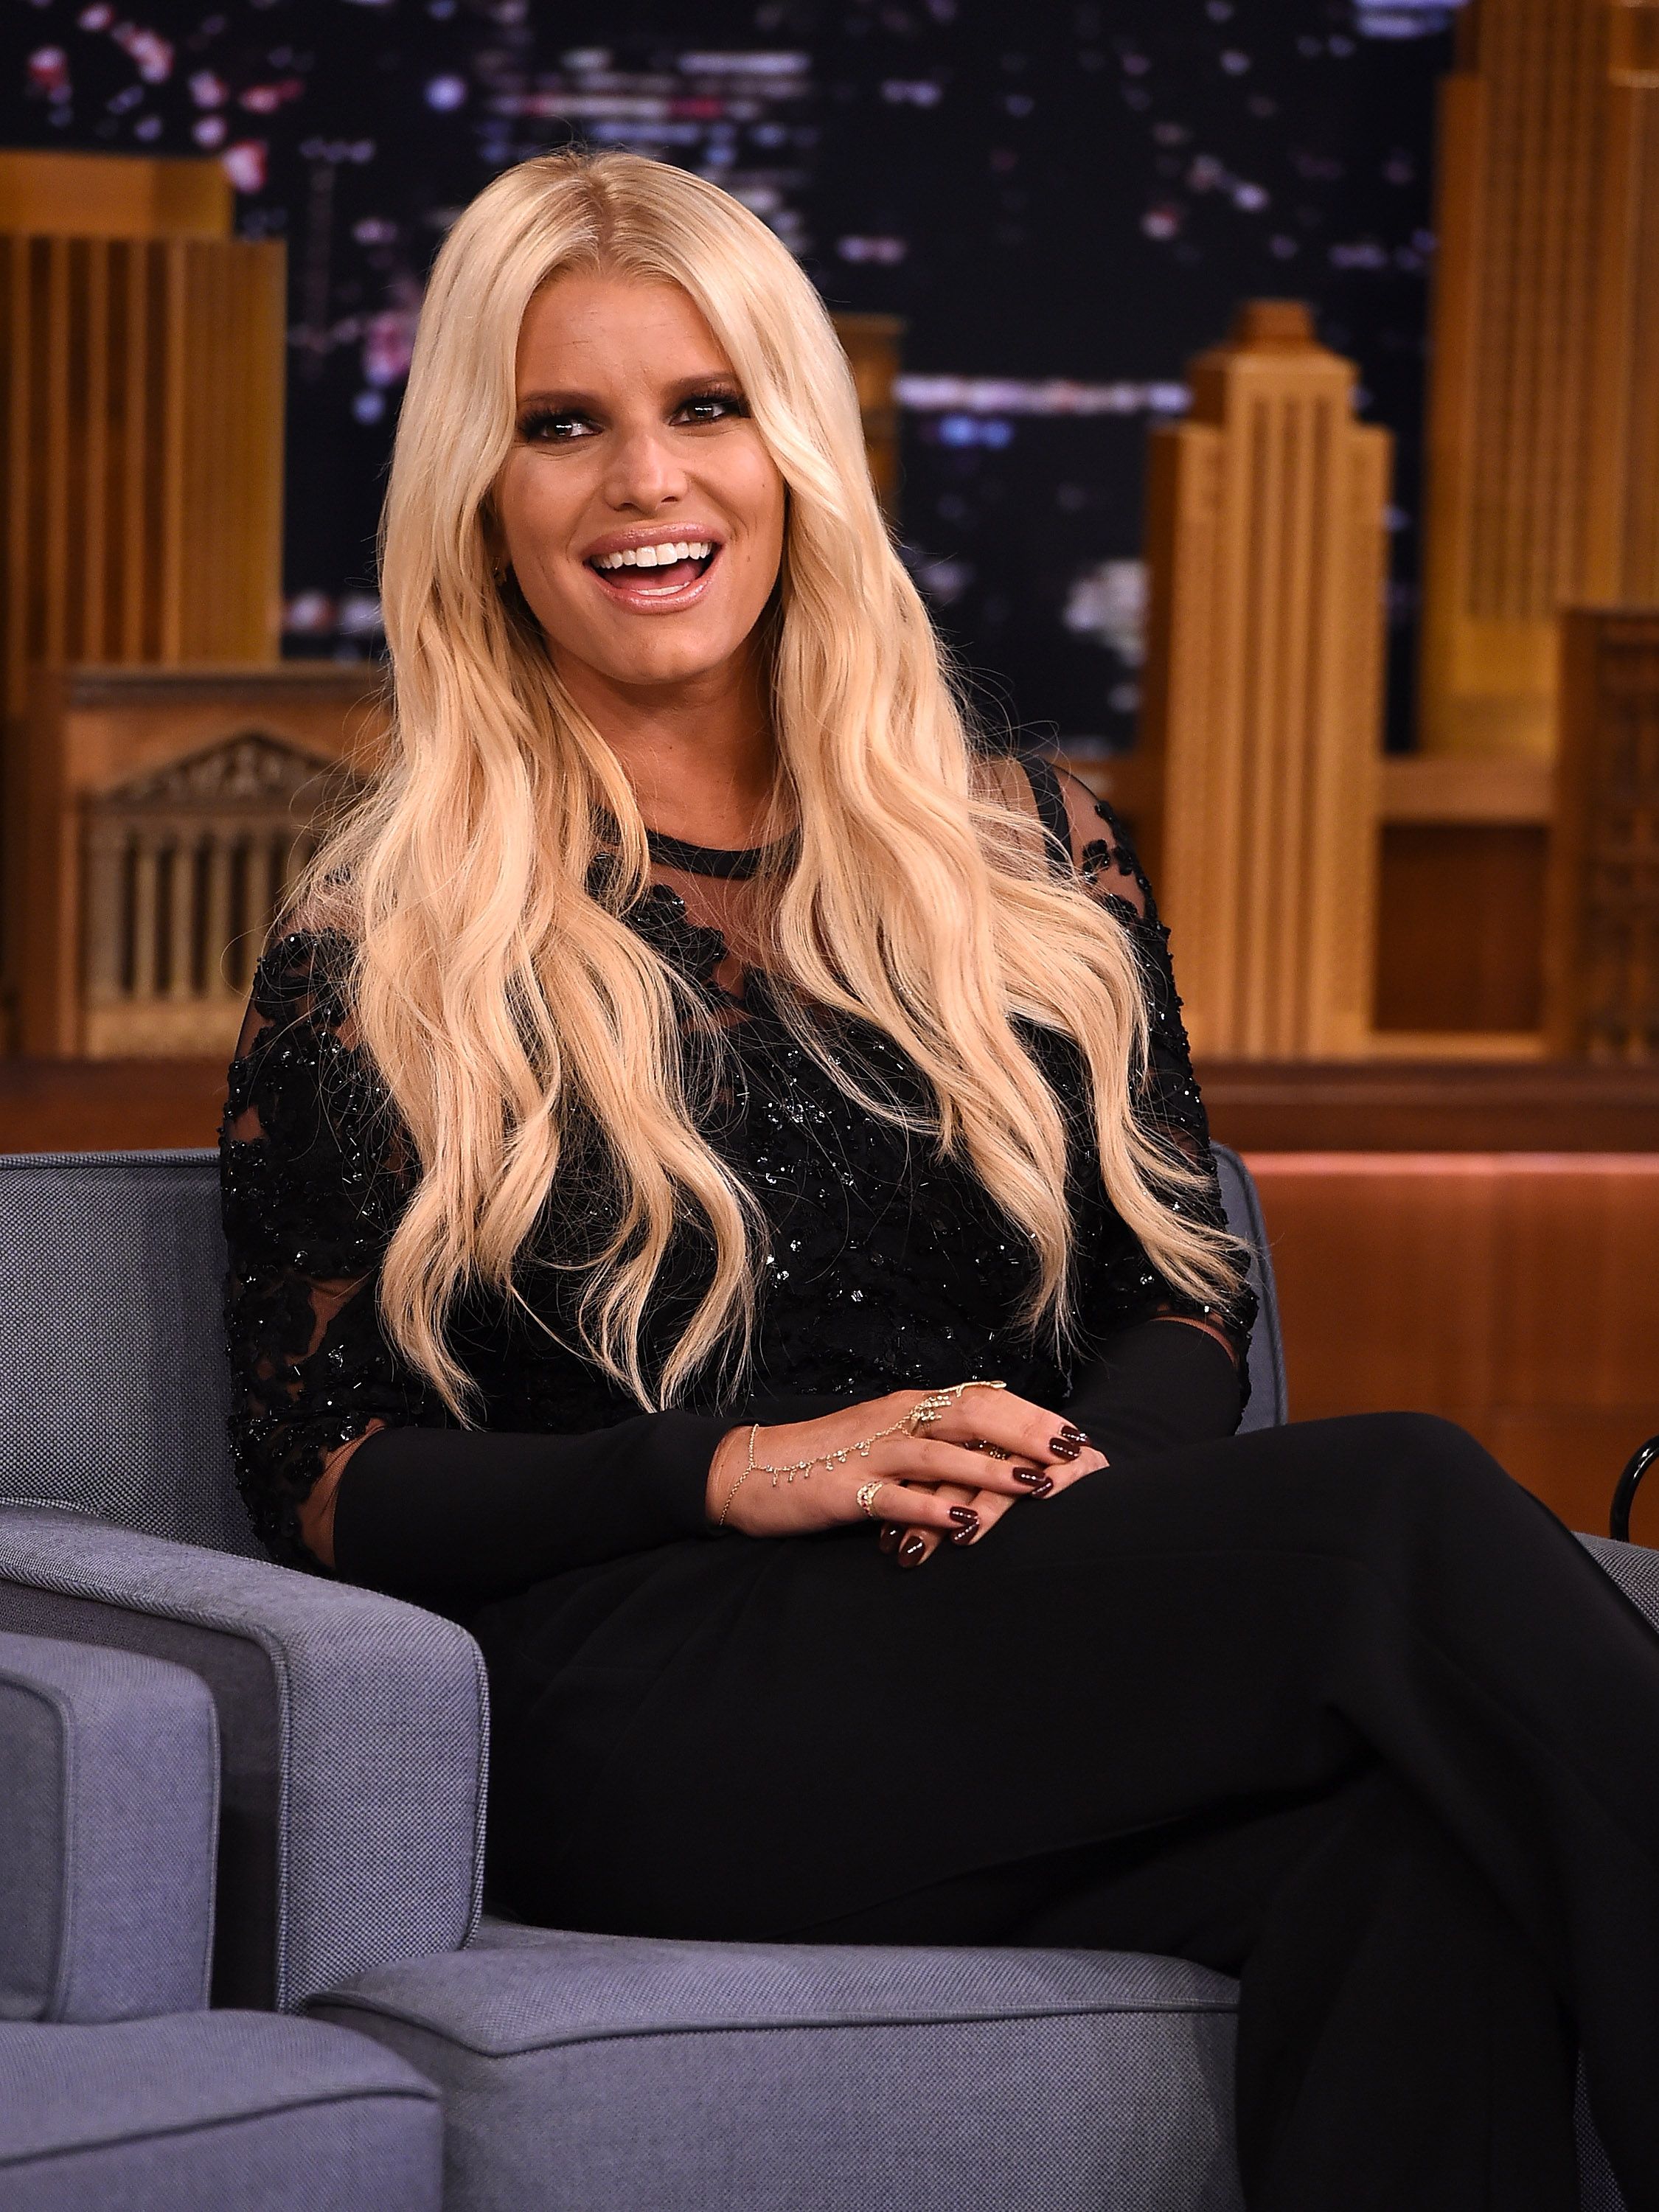 Jessica Simpson during "The Tonight Show Starring Jimmy Fallon" at Rockefeller Center on September 8, 2015, in New York City. | Source: Getty Images